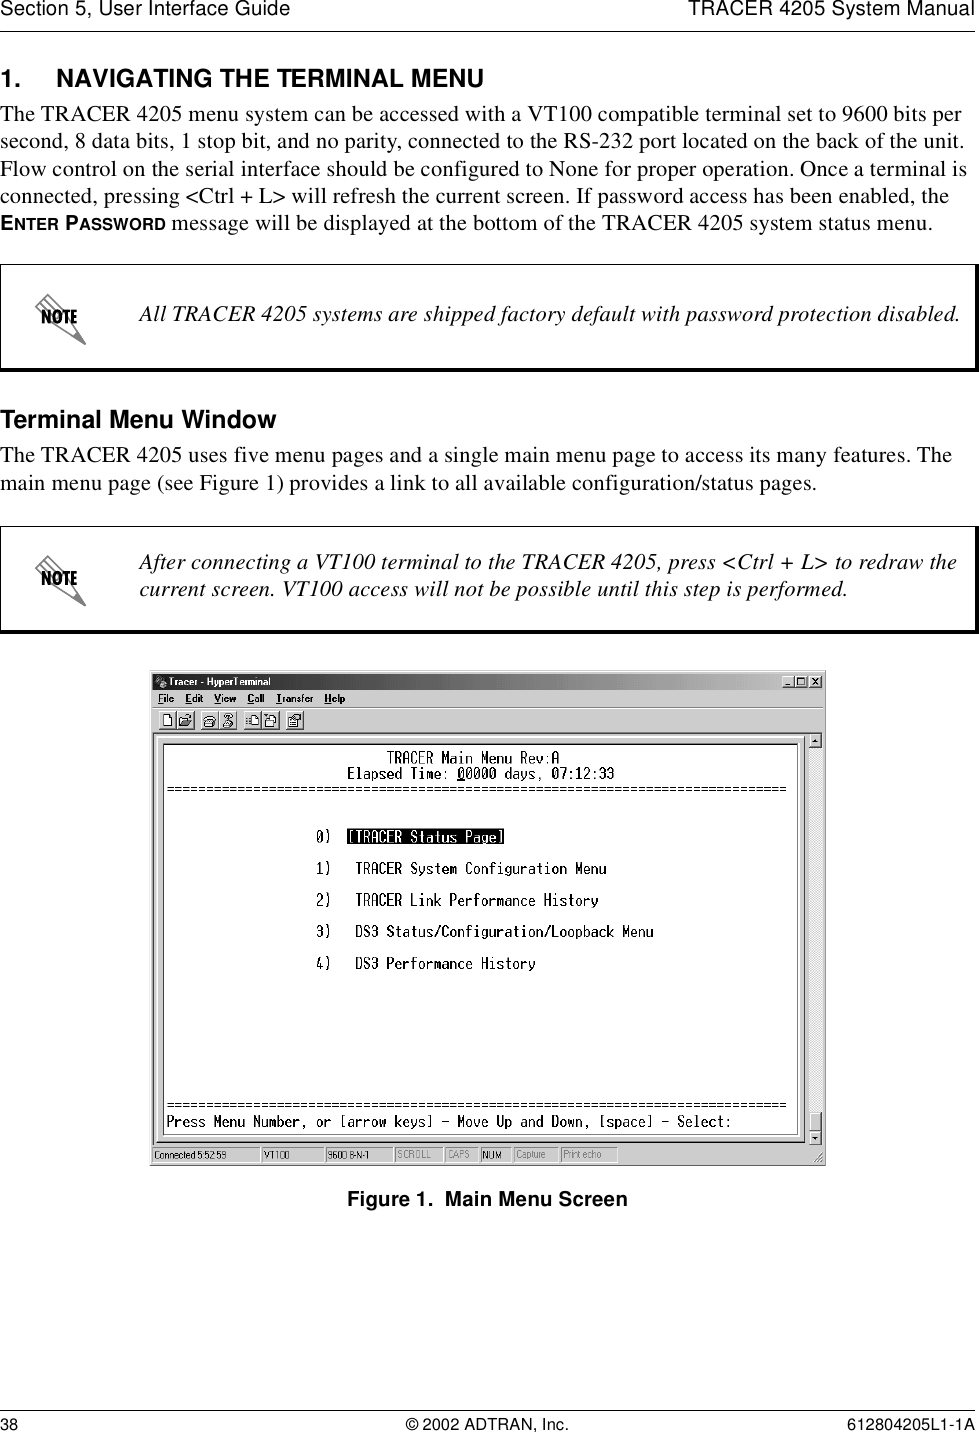 Section 5, User Interface Guide TRACER 4205 System Manual38 © 2002 ADTRAN, Inc. 612804205L1-1A1. NAVIGATING THE TERMINAL MENUThe TRACER 4205 menu system can be accessed with a VT100 compatible terminal set to 9600 bits per second, 8 data bits, 1 stop bit, and no parity, connected to the RS-232 port located on the back of the unit. Flow control on the serial interface should be configured to None for proper operation. Once a terminal is connected, pressing &lt;Ctrl + L&gt; will refresh the current screen. If password access has been enabled, the ENTER PASSWORD message will be displayed at the bottom of the TRACER 4205 system status menu. Terminal Menu WindowThe TRACER 4205 uses five menu pages and a single main menu page to access its many features. The main menu page (see Figure 1) provides a link to all available configuration/status pages.Figure 1.  Main Menu ScreenAll TRACER 4205 systems are shipped factory default with password protection disabled.After connecting a VT100 terminal to the TRACER 4205, press &lt;Ctrl + L&gt; to redraw the current screen. VT100 access will not be possible until this step is performed.